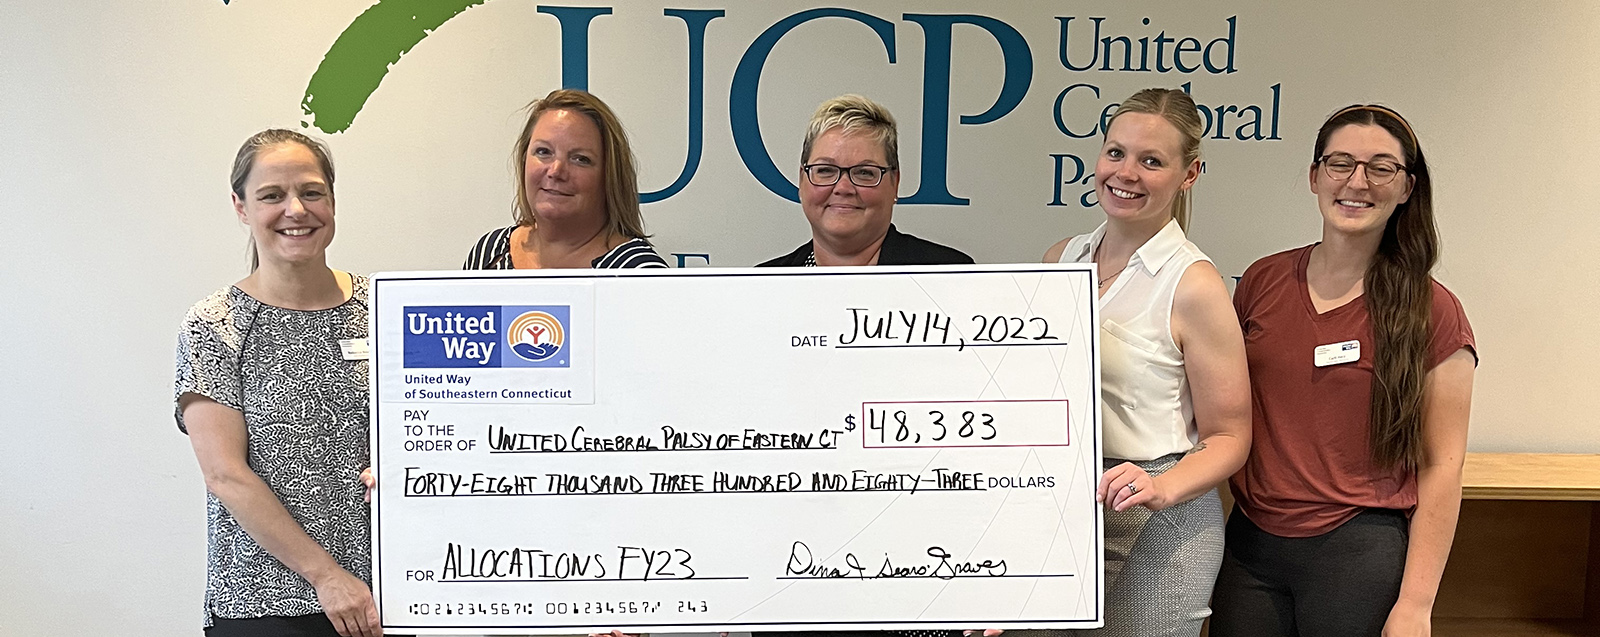 United Way Donates $48,383 to UCP of Eastern CT